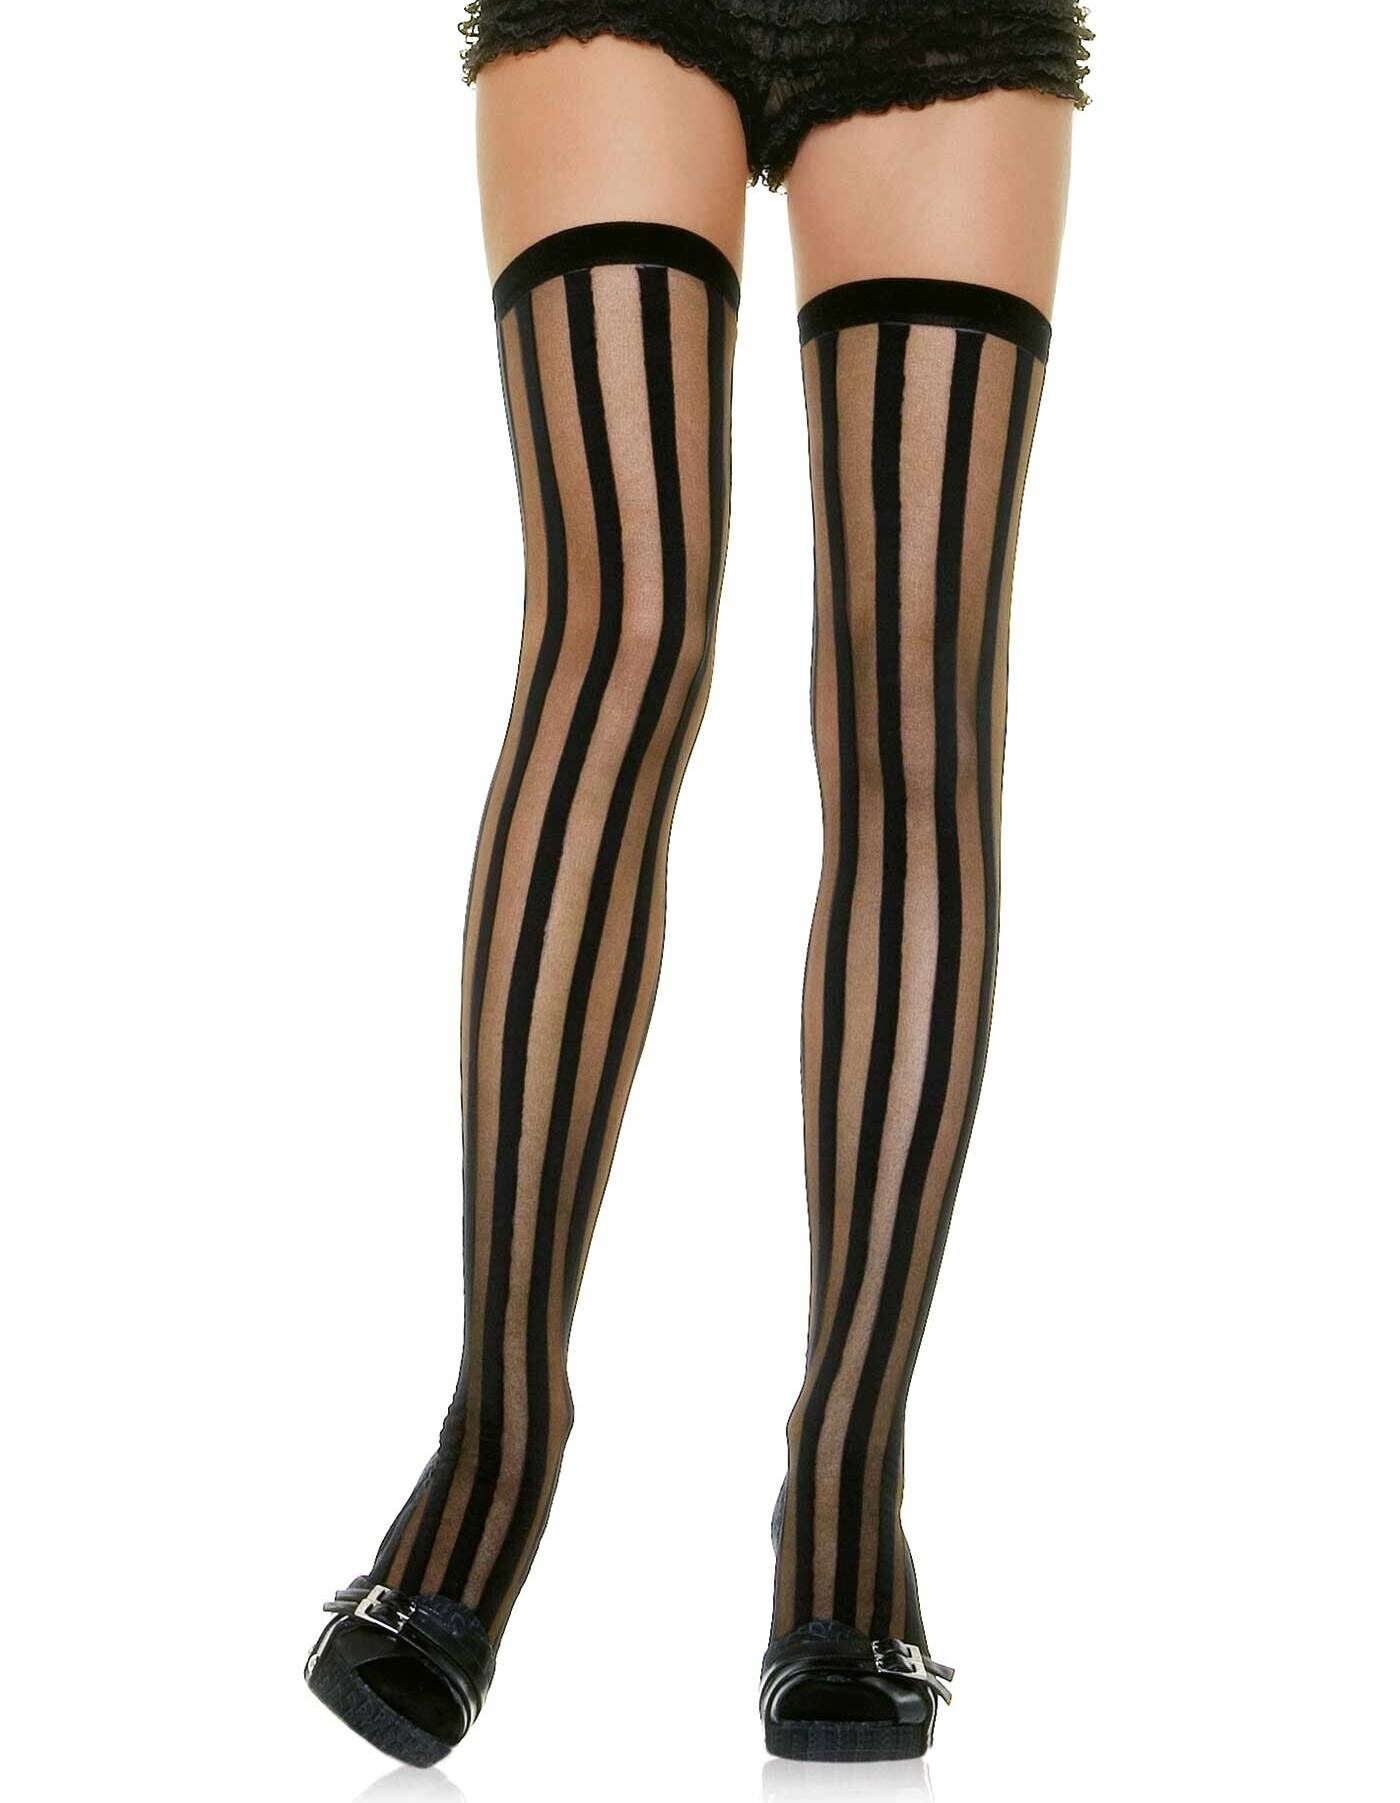 Sheer Thigh Highs with Black Vertical Stripes